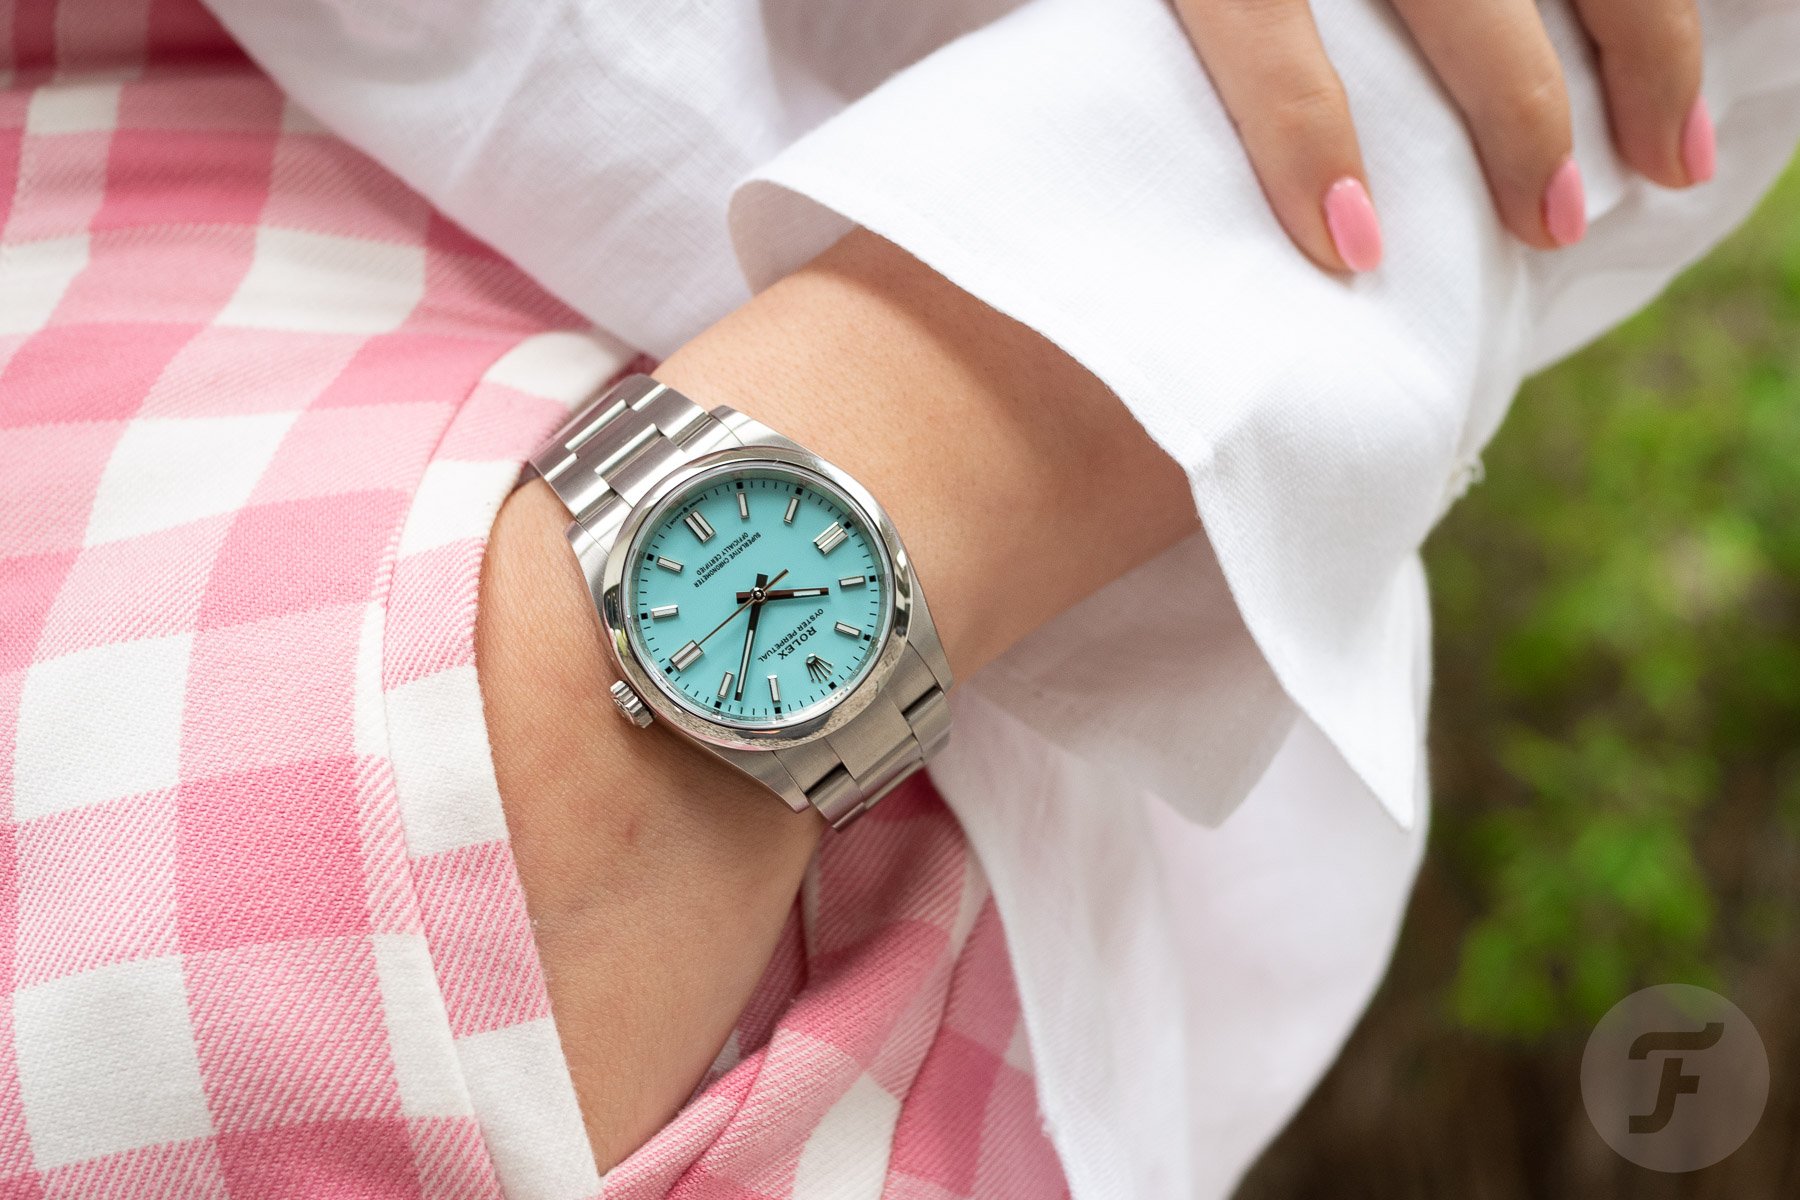 Rolex Oyster Perpetual turquoise pocket shot